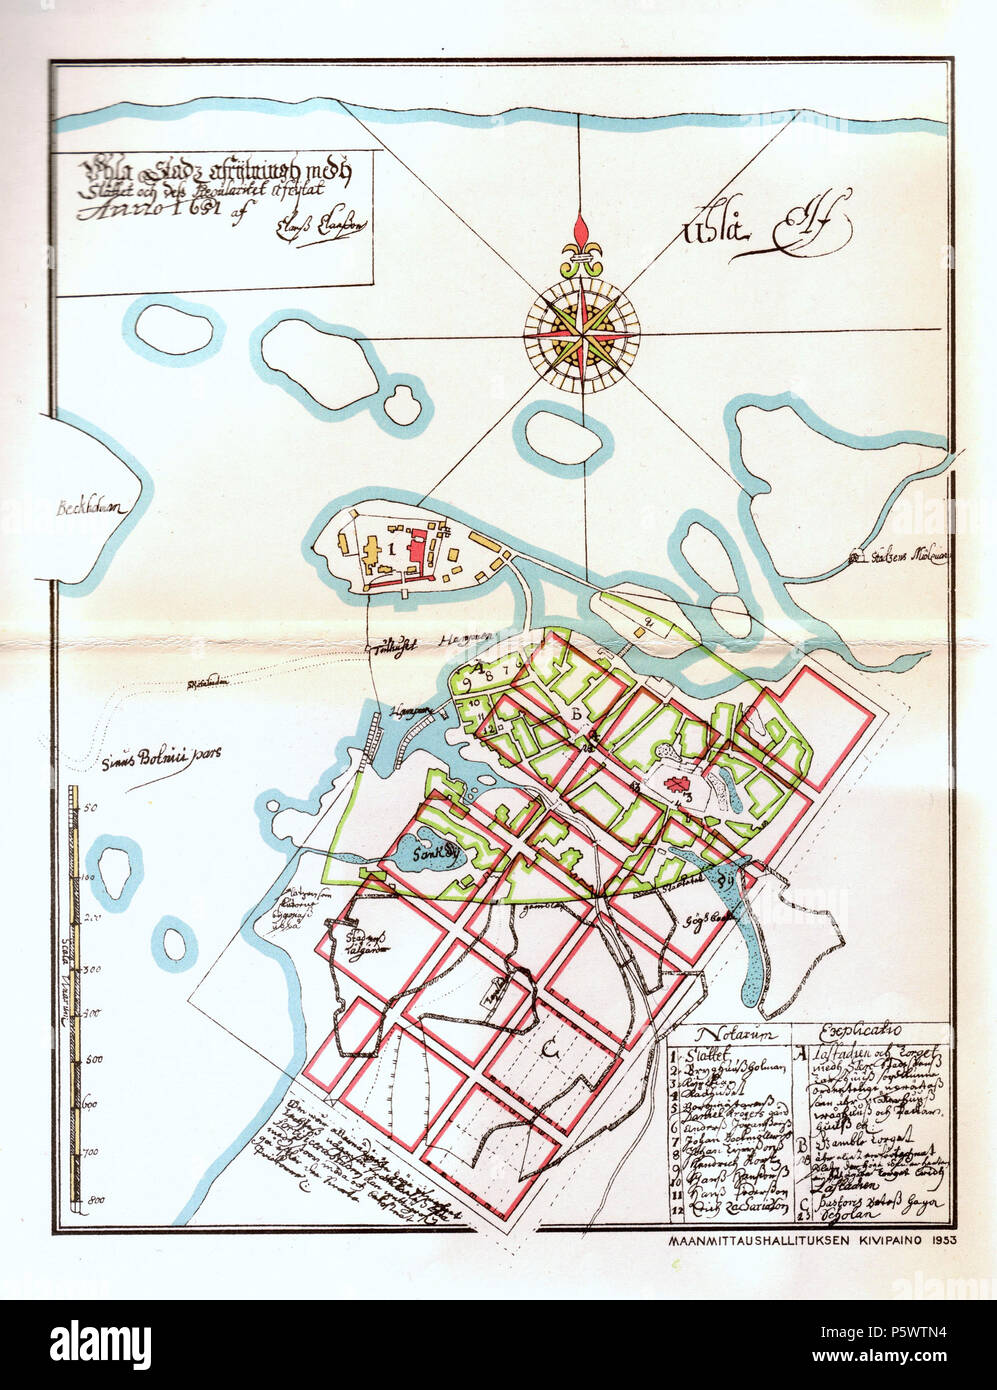 N/A. English: An old map of Oulu, Finland was drawn by Claes Claesson in 1651. The rectangular street layout plan is done with red colour. Suomi: Claes Claessonin vuonna 1651 piirtämä kartta Oulusta. Ruutukaavaa on jo hahmoteltu punaisella. Original 1651 / Source Book 1953 / Scanned 2006-02-04. Claes Claesson 350 Claes Claesson Map Oulu 1651 Stock Photo